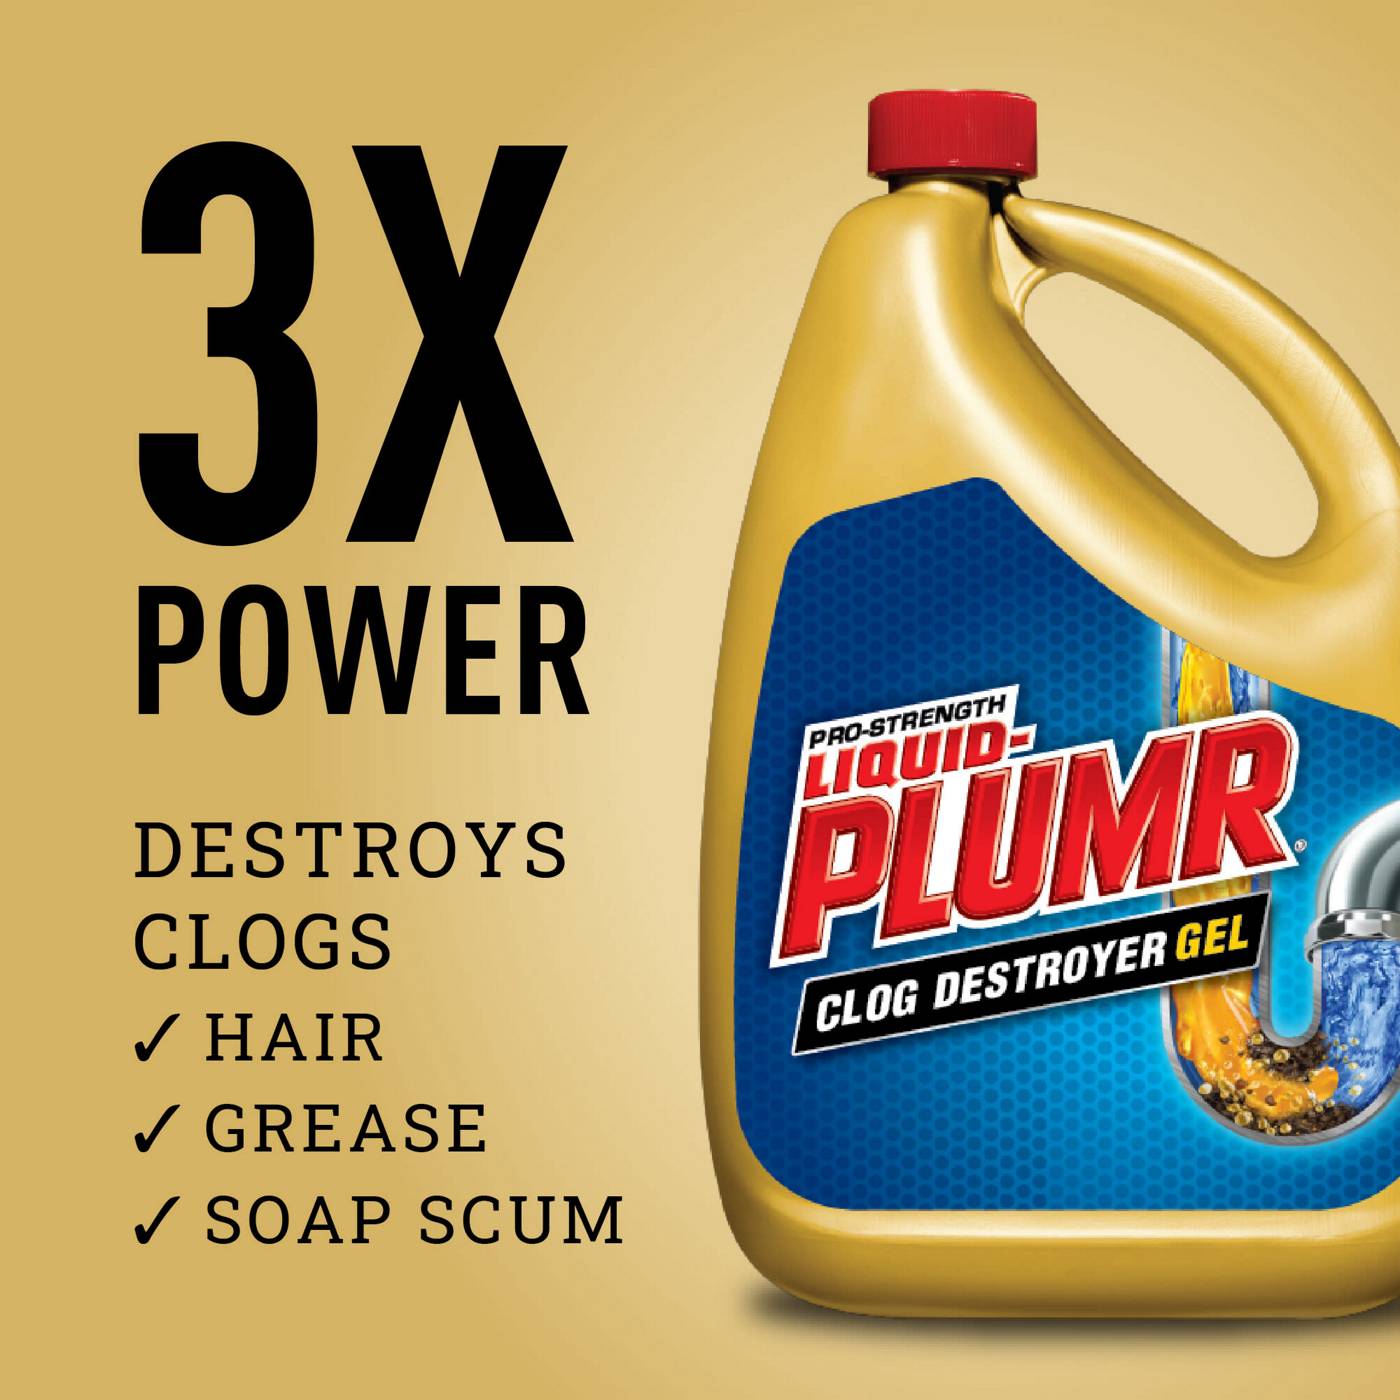 Liquid-Plumr Pro-Strength Clog Destroyer Gel with PipeGuard, Liquid Drain Cleaner; image 8 of 8